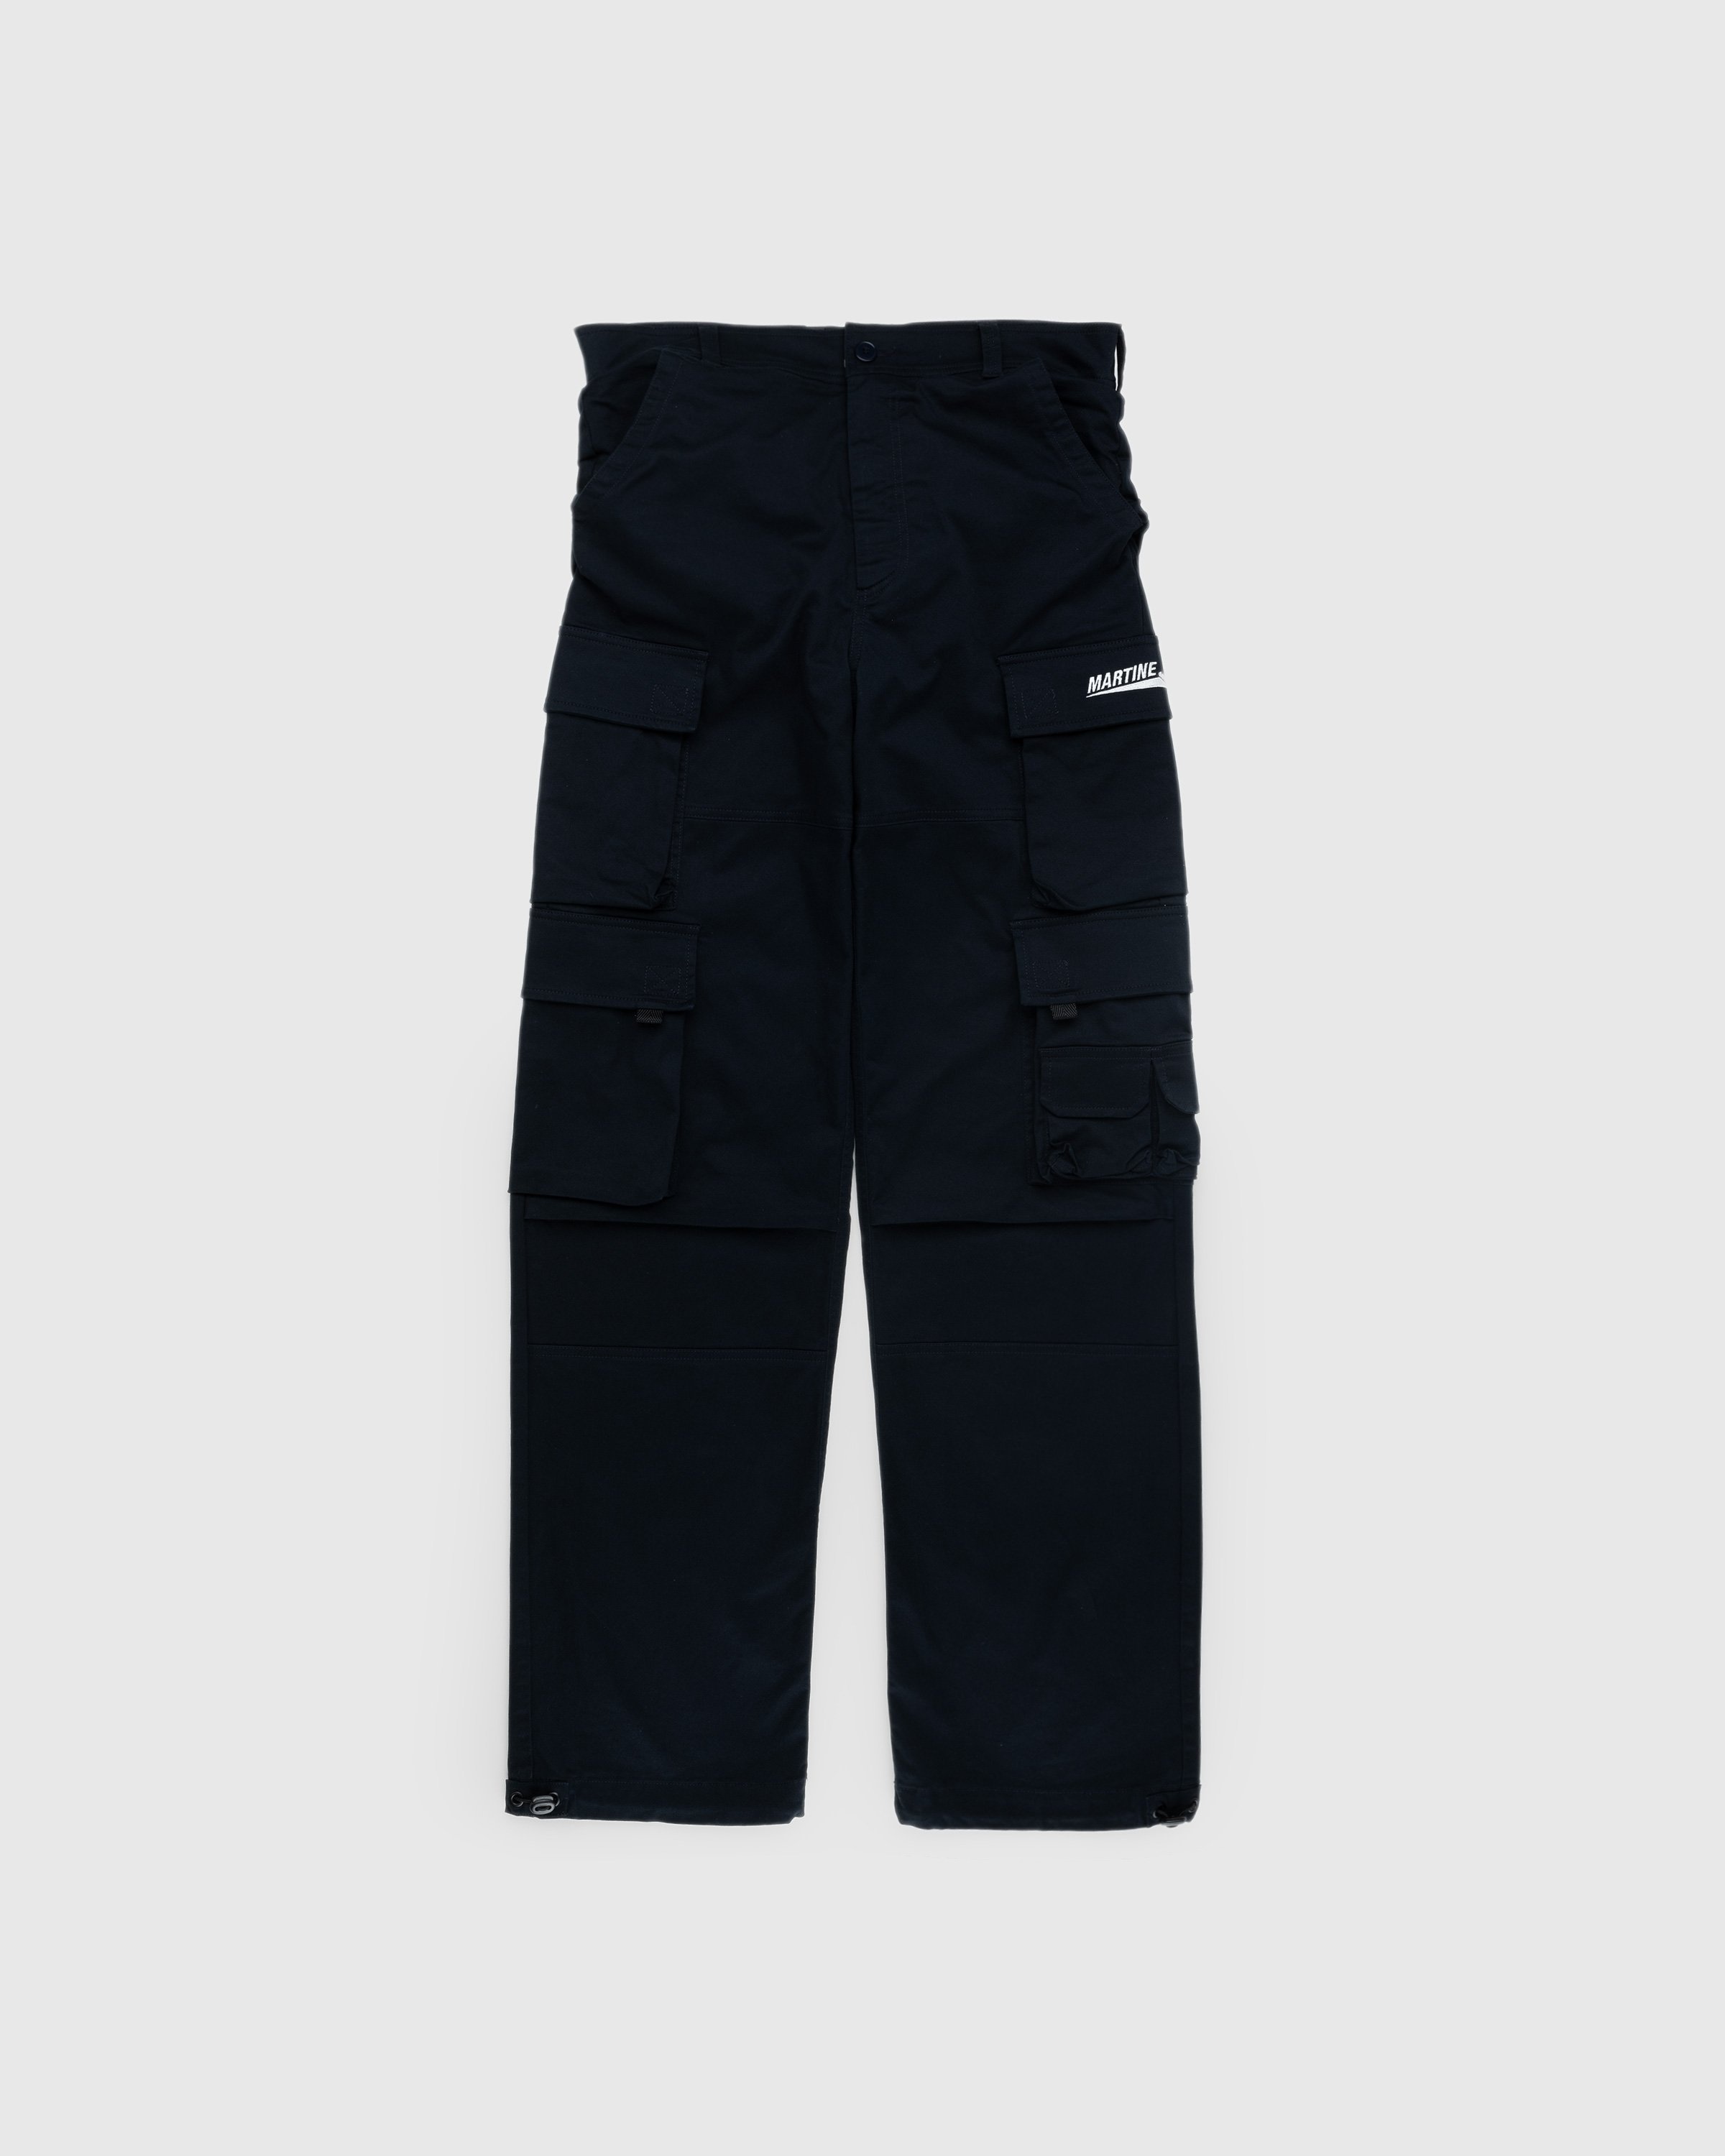 Martine Rose – Pulled Cargo Trouser Navy - Pants - Blue - Image 1